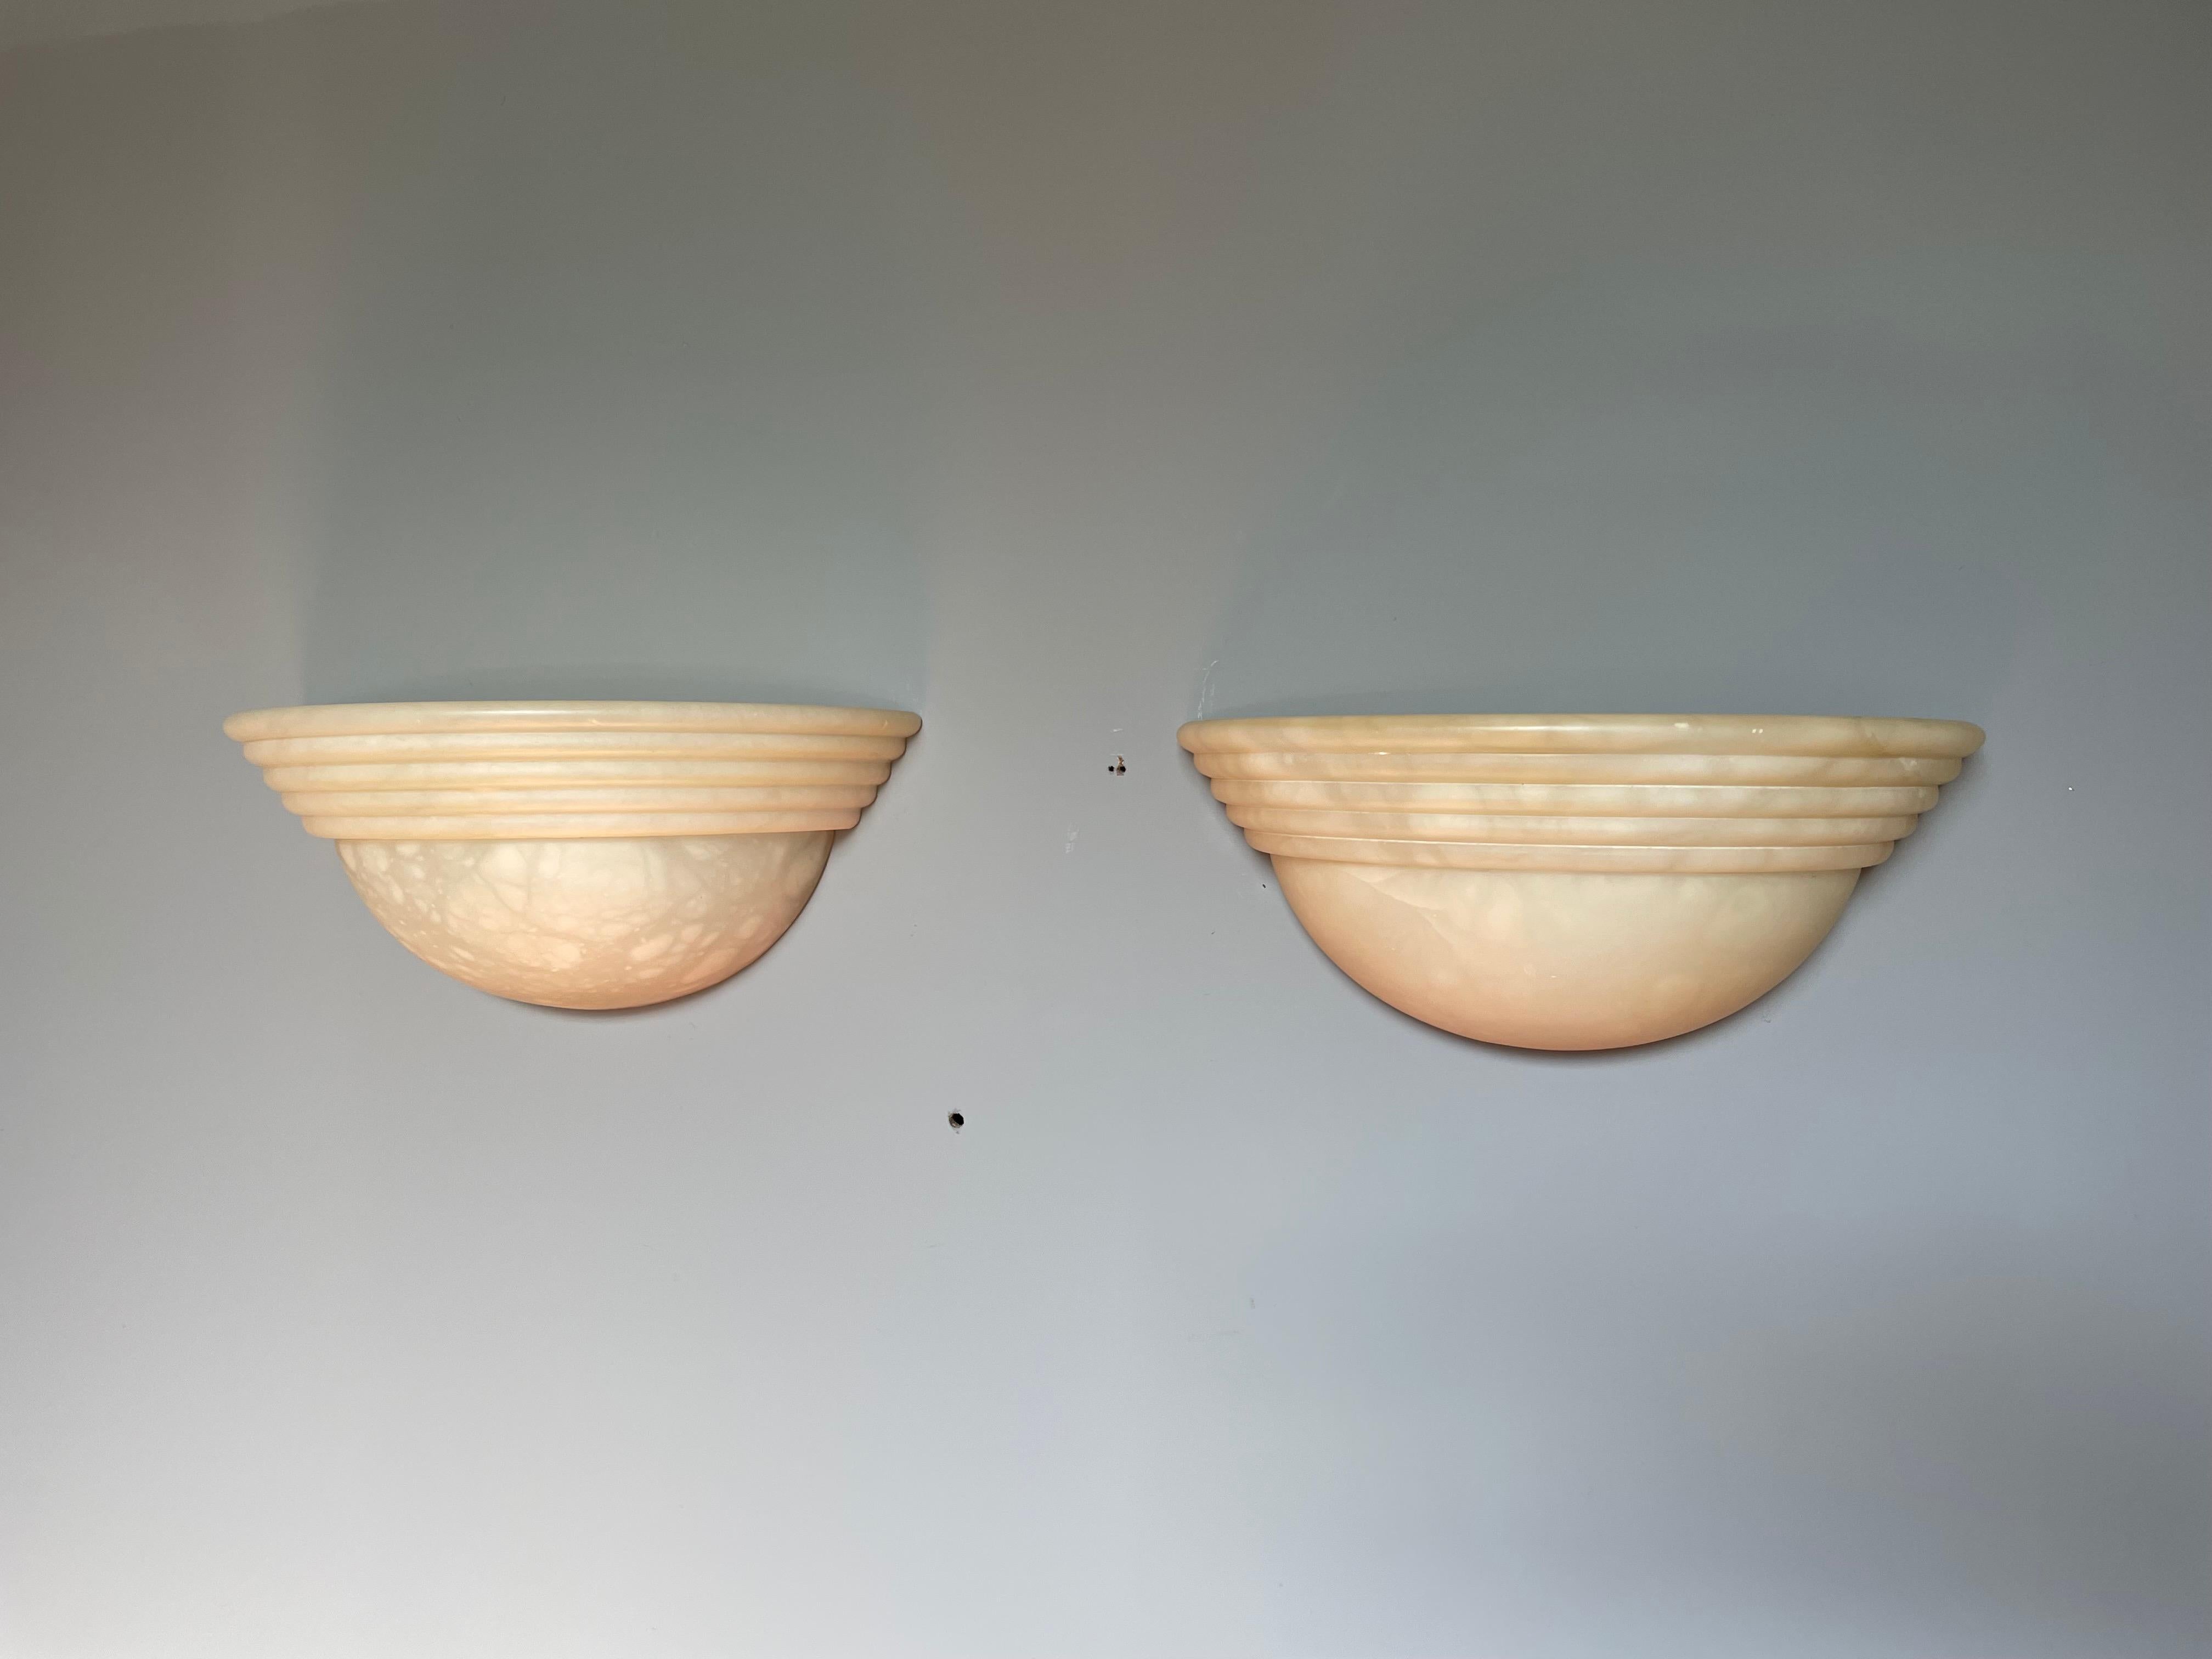 European Midcentury Handcrafted Pair of Art Deco Style Alabaster Wall Lights or Sconces